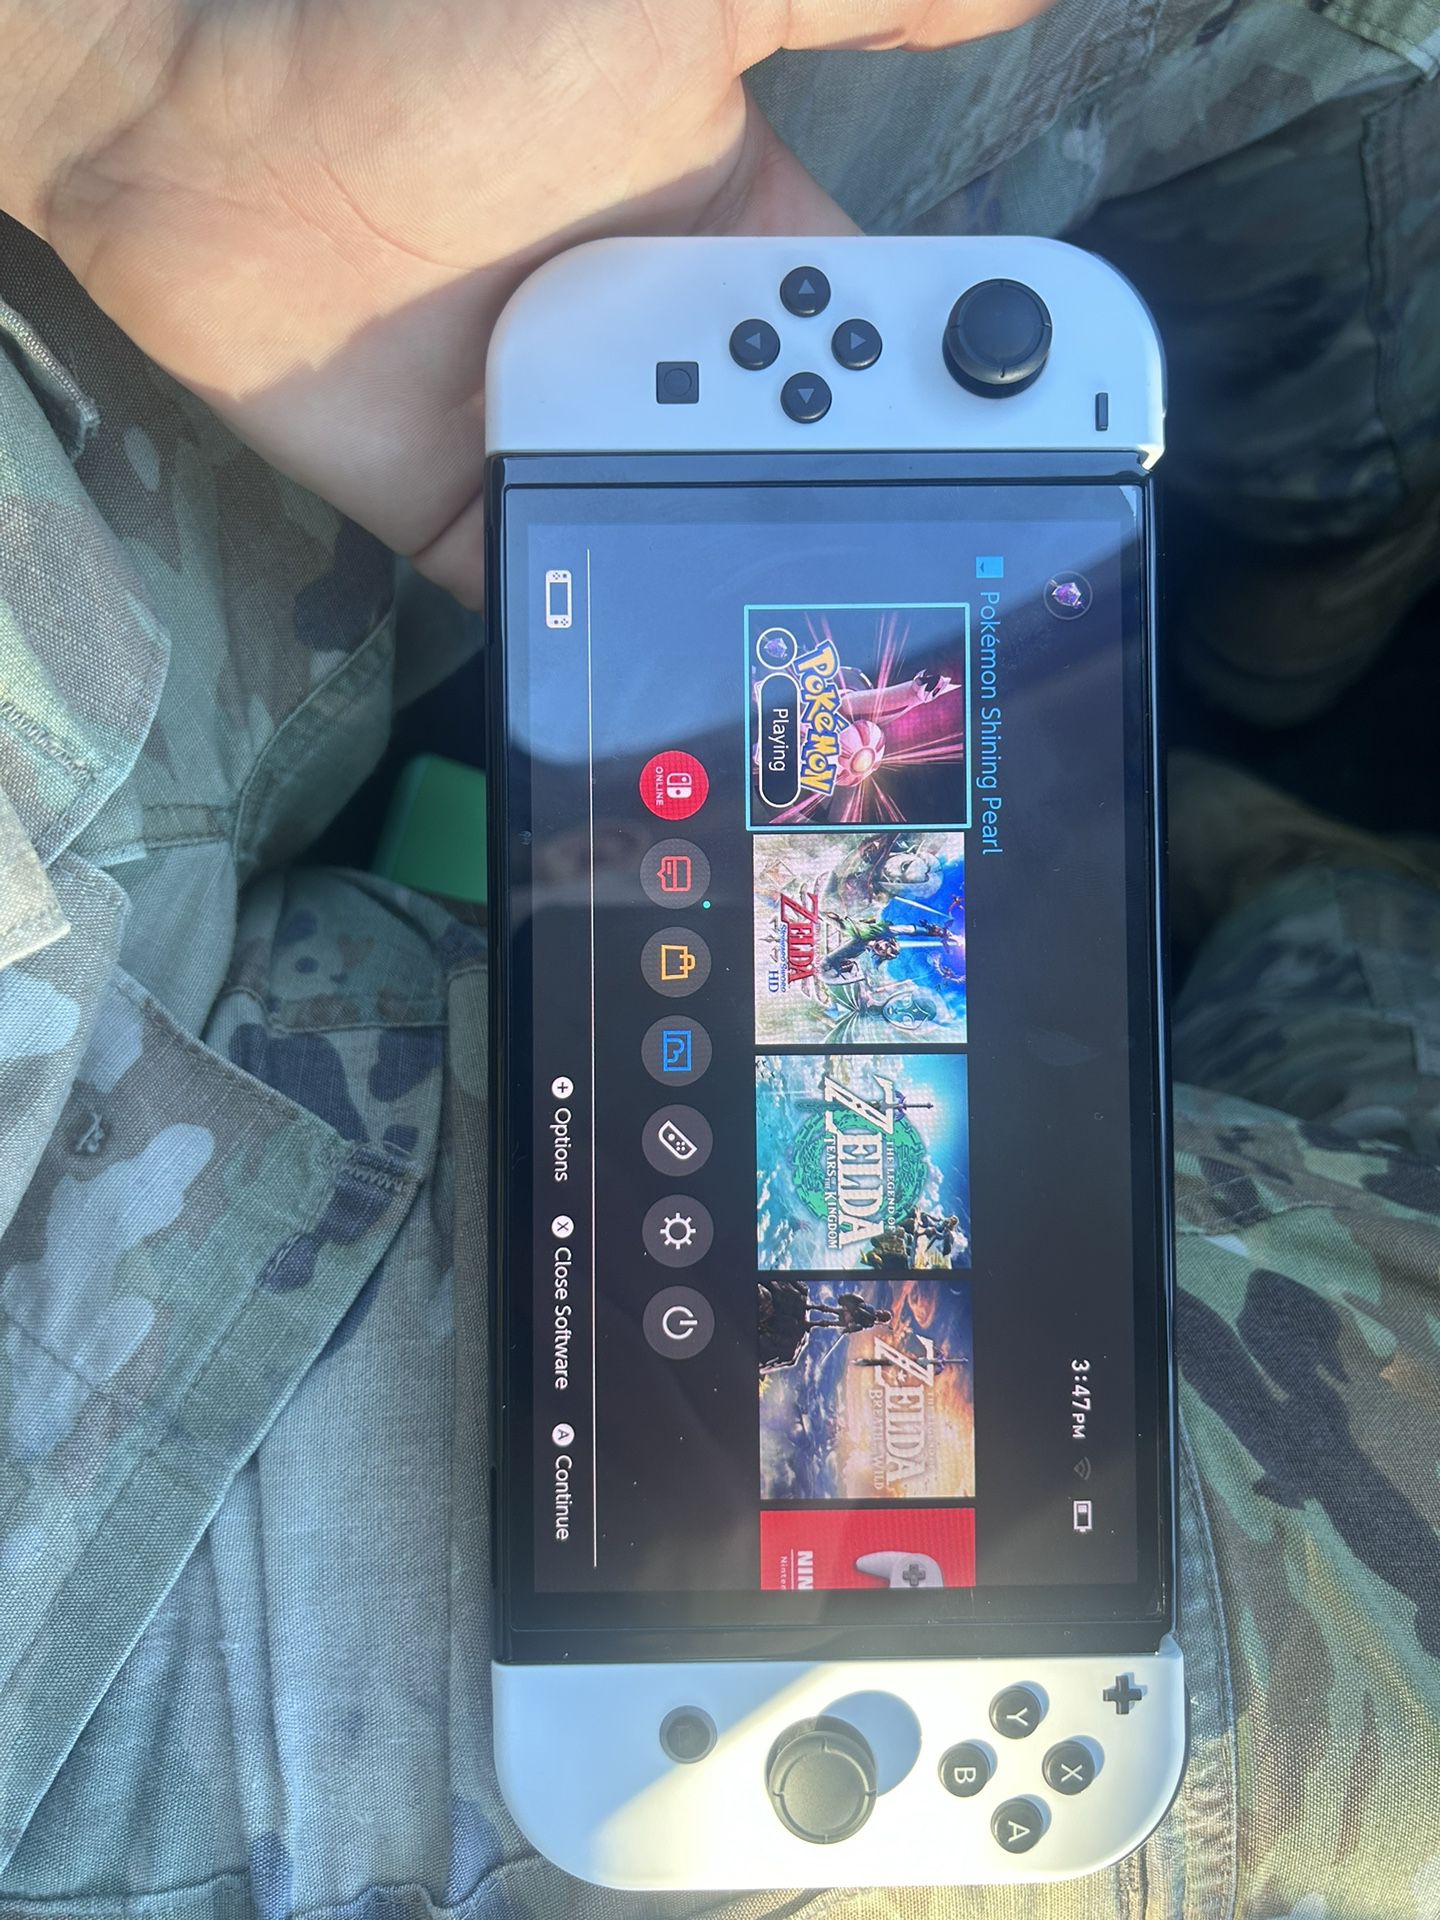 New Nintendo Switch Oled. Comes with everything plus SD card, Carrying Case, Screen Protector and Pokemon Shining Pearl 